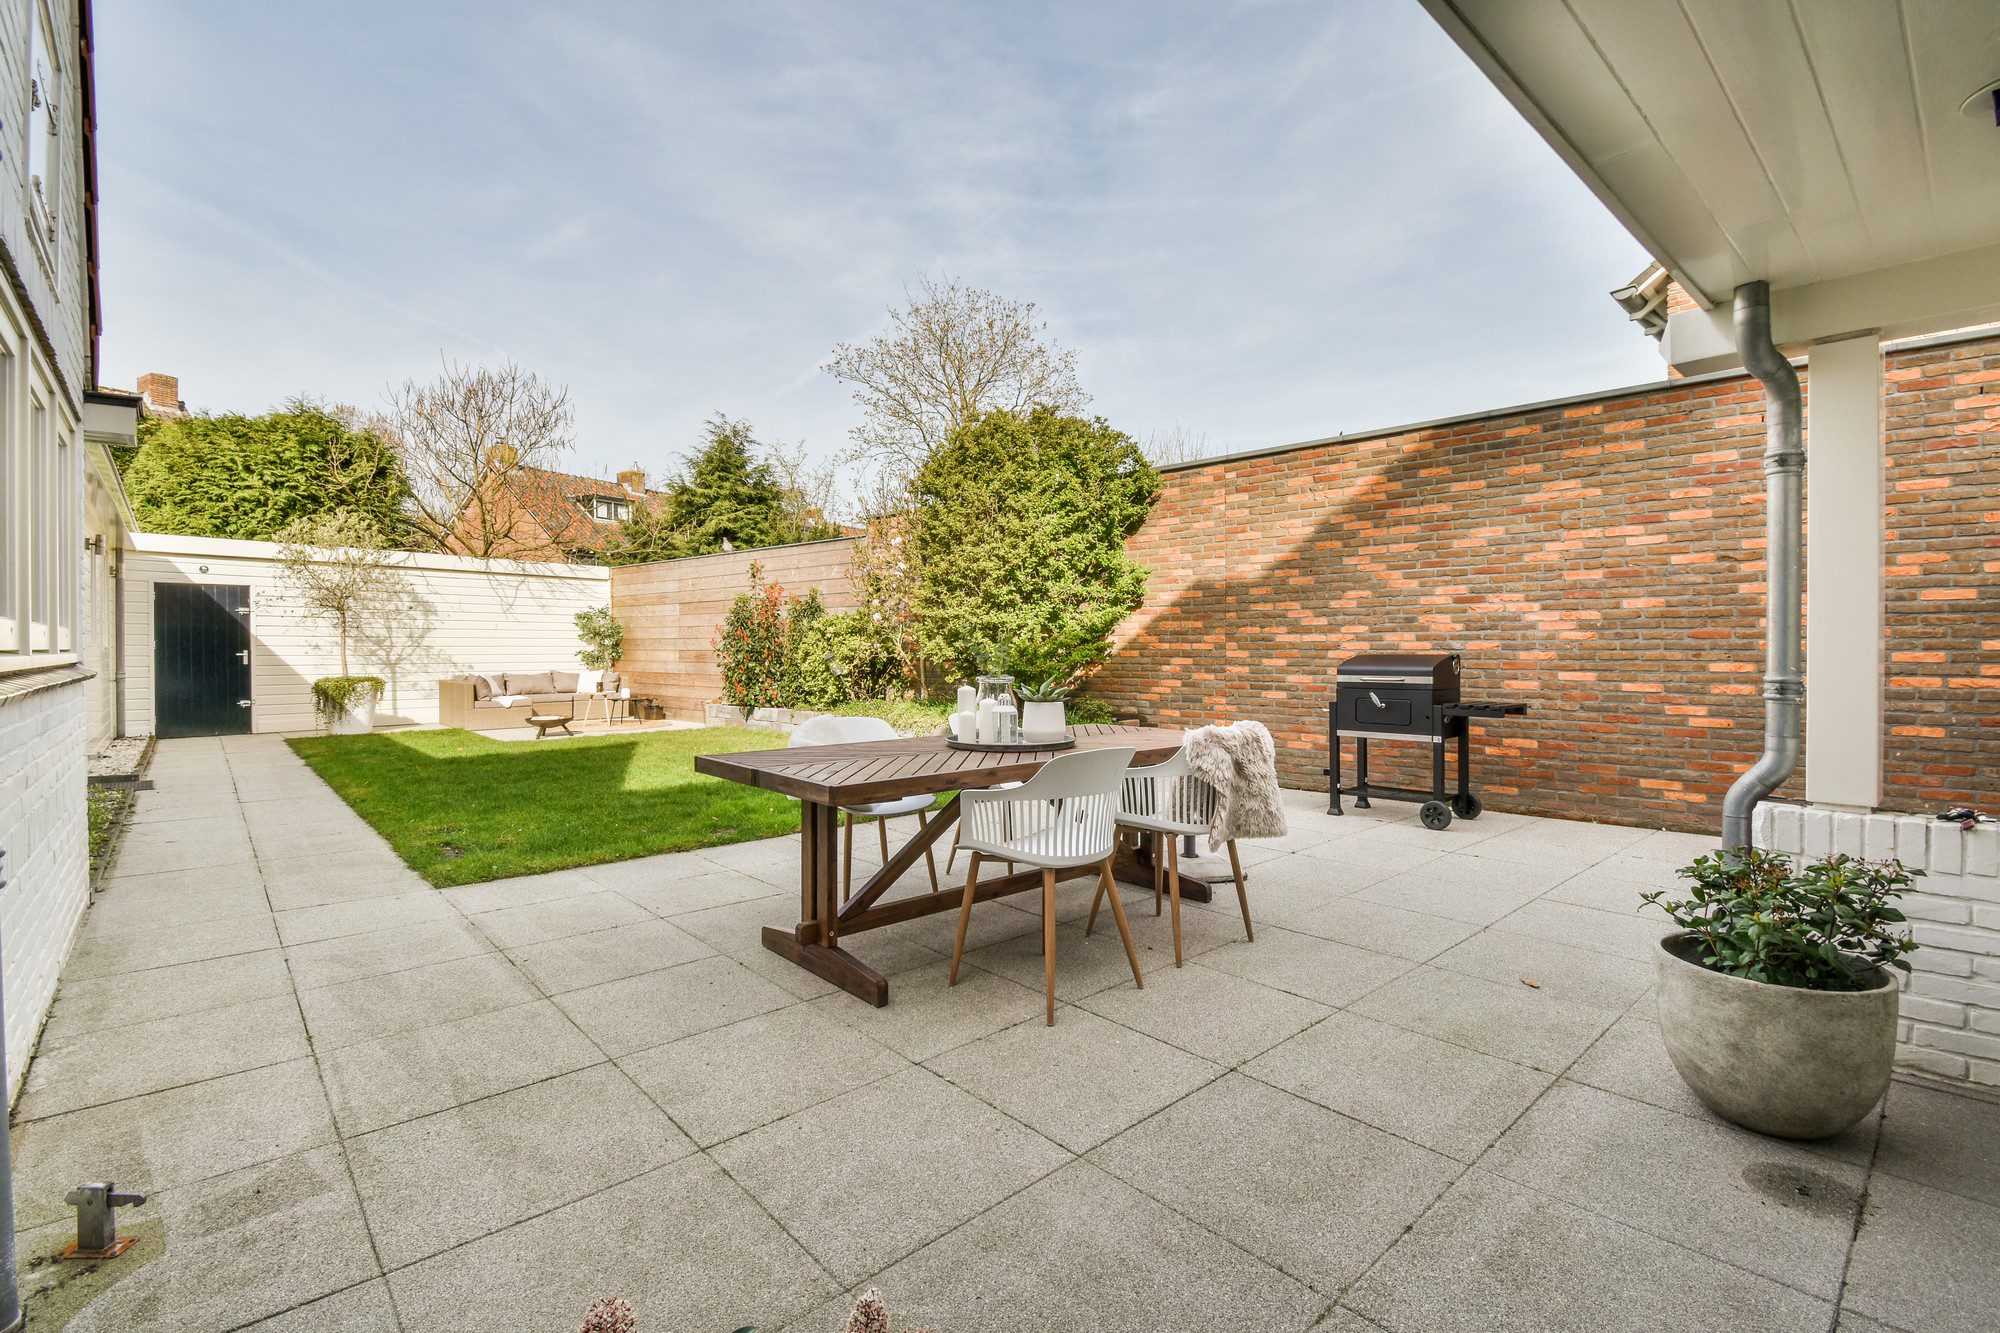 The image shows a well-kept outdoor patio area of a residential property. Key features include:- A spacious lawn with neatly cut grass.
- A patio dining set composed of a wooden table and chairs, suggesting a space for outdoor dining or relaxation.
- A barbecue grill positioned to the right, indicating a place for outdoor cooking.
- A large brick wall that encloses the area, providing privacy.
- A variety of shrubbery and a tree, which add greenery and life to the space.
- Part of a house with a downspout visible, showing that the patio is adjacent to the structure.
- A paved walkway leading up to the patio area, providing a clean and easy path to navigate through the garden.
- Potted plants adding decorative elements to the space.